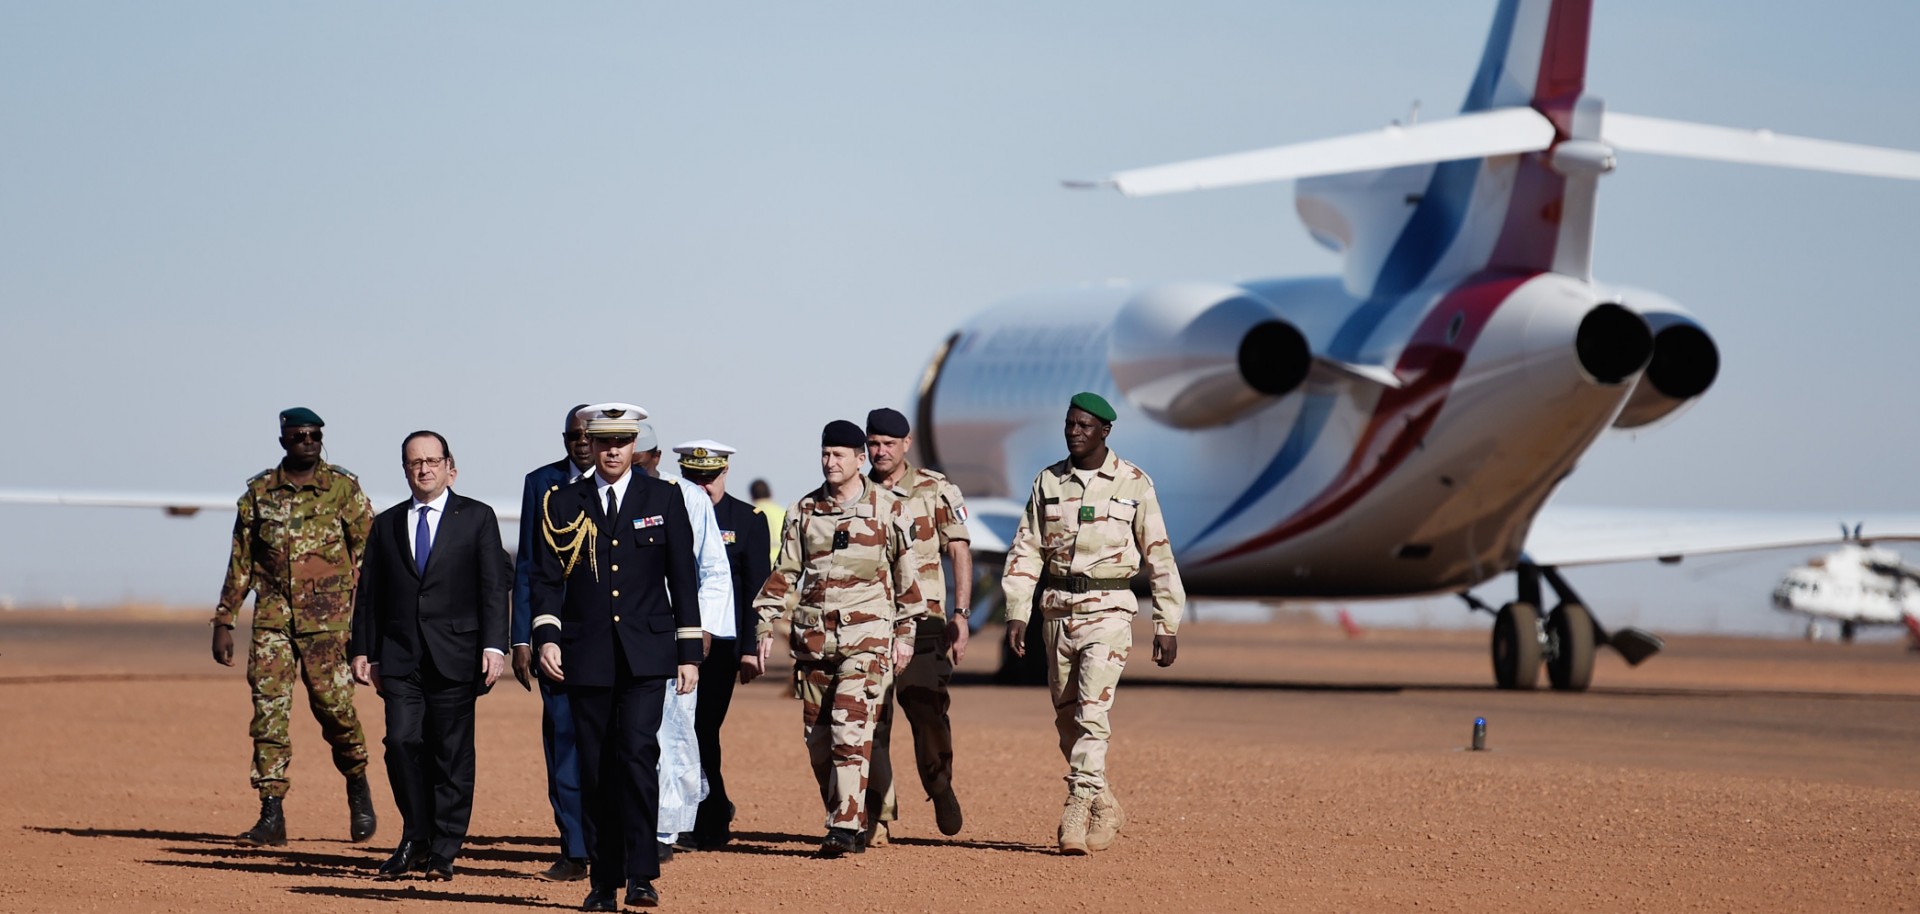 France has reached a crossroads in its policy toward Africa, and its next president could play an outsized role in determining what direction that policy takes.